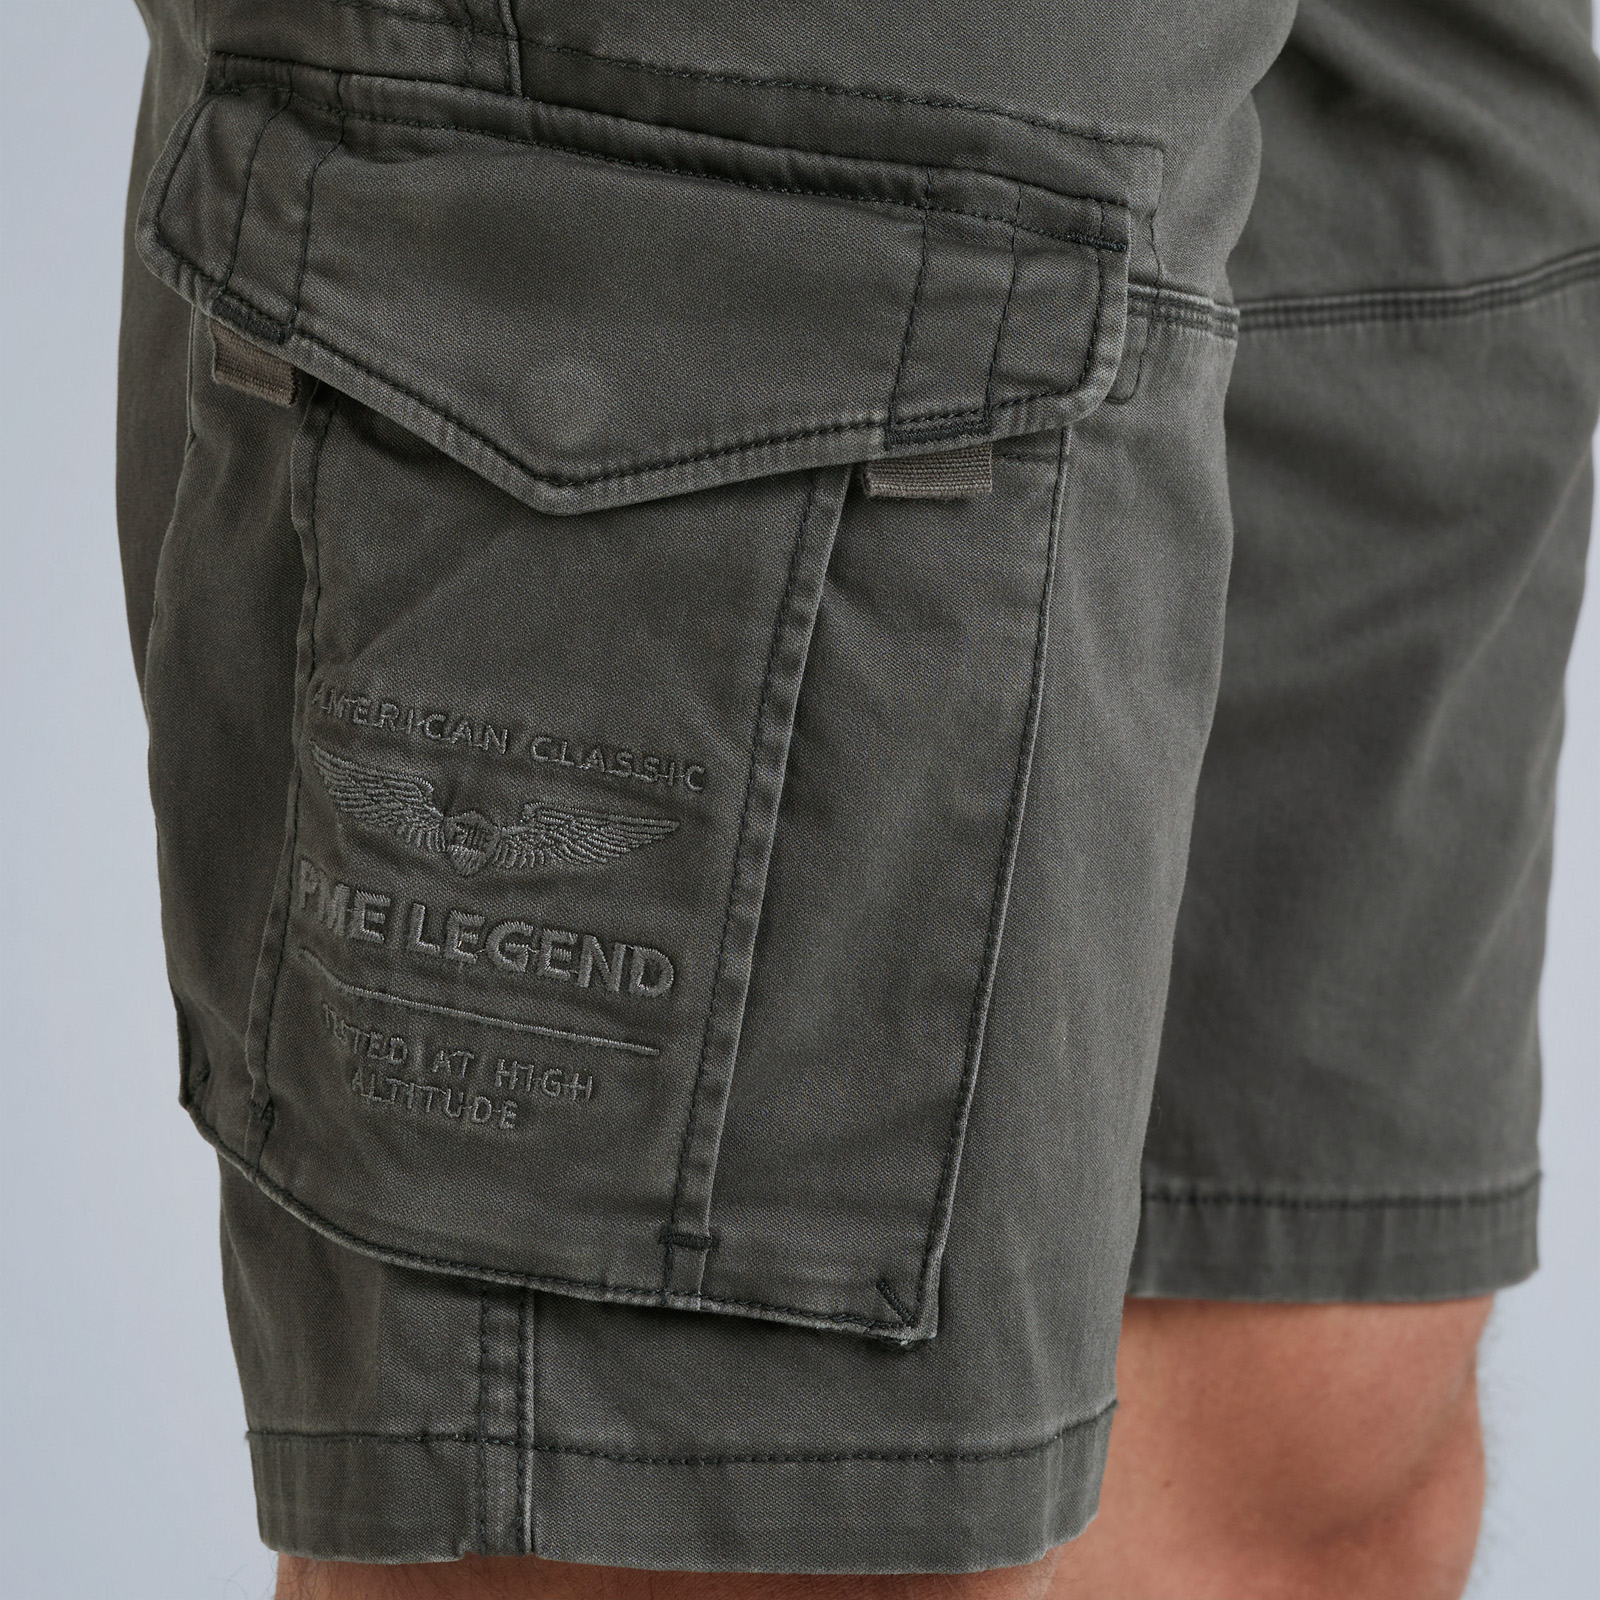 Chirurgie Subsidie Herinnering PME LEGEND | Stretch Twill Cargo Short | Free shipping and returns